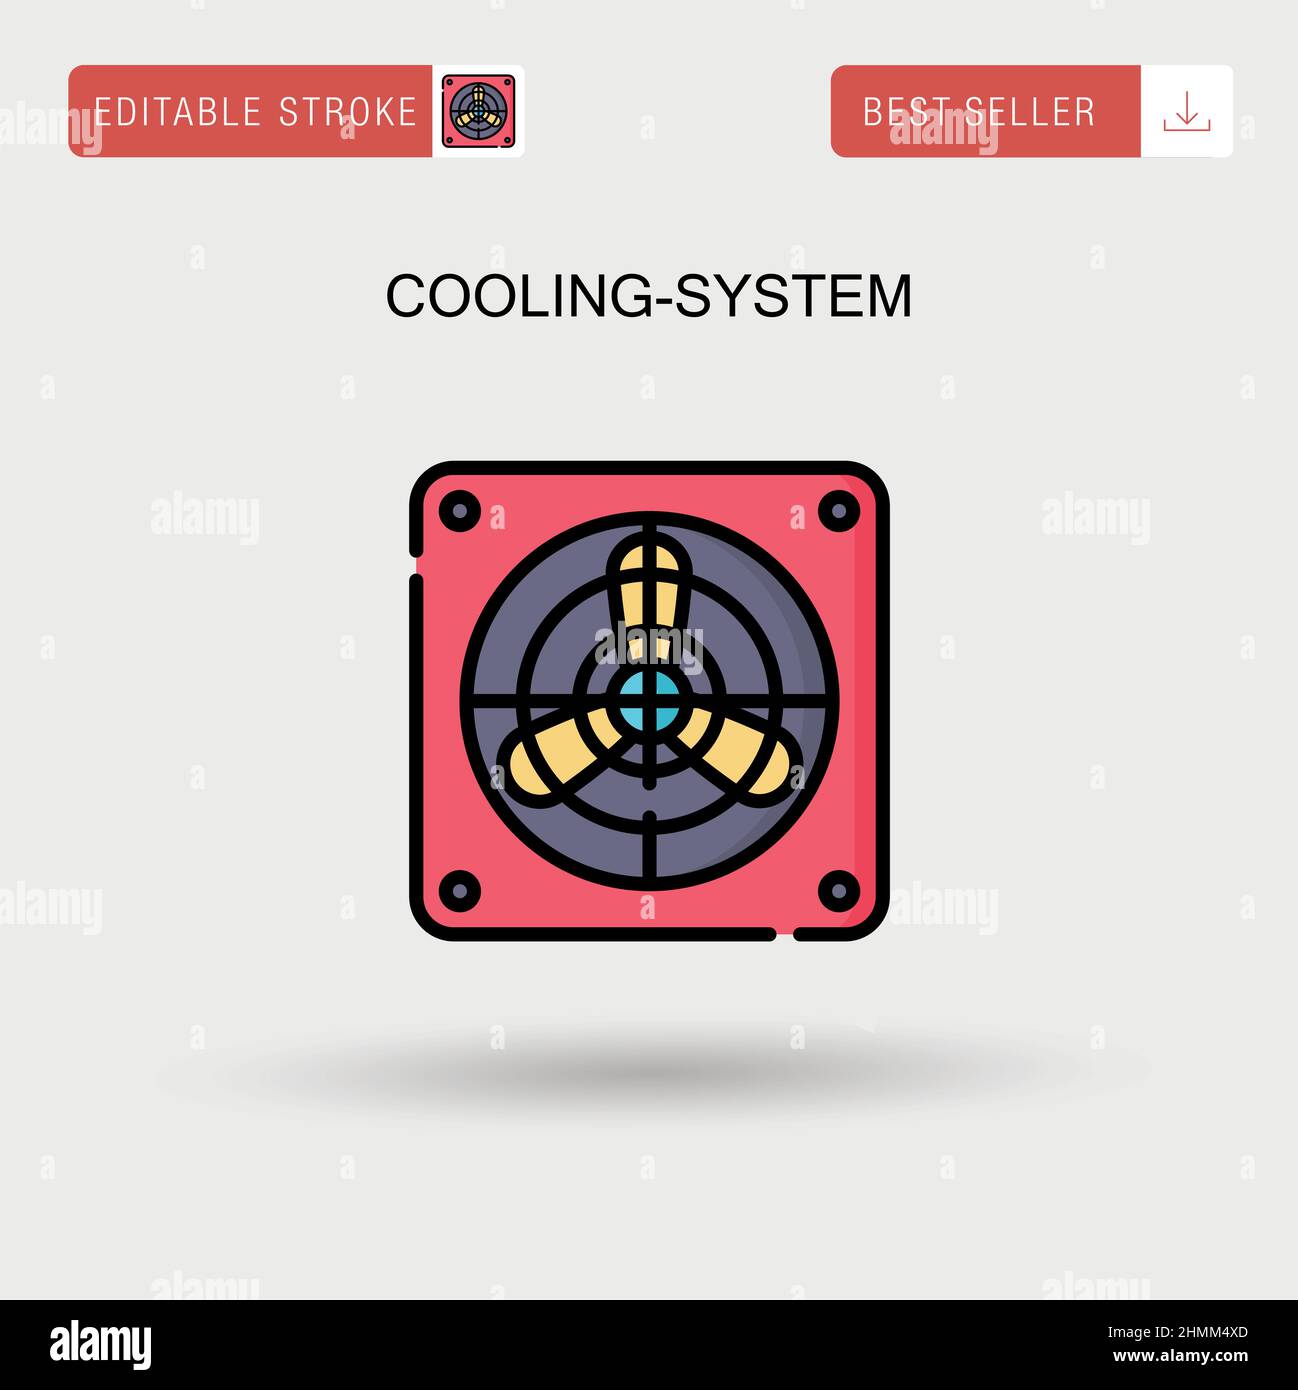 Cooling-system Simple vector icon. Stock Vector